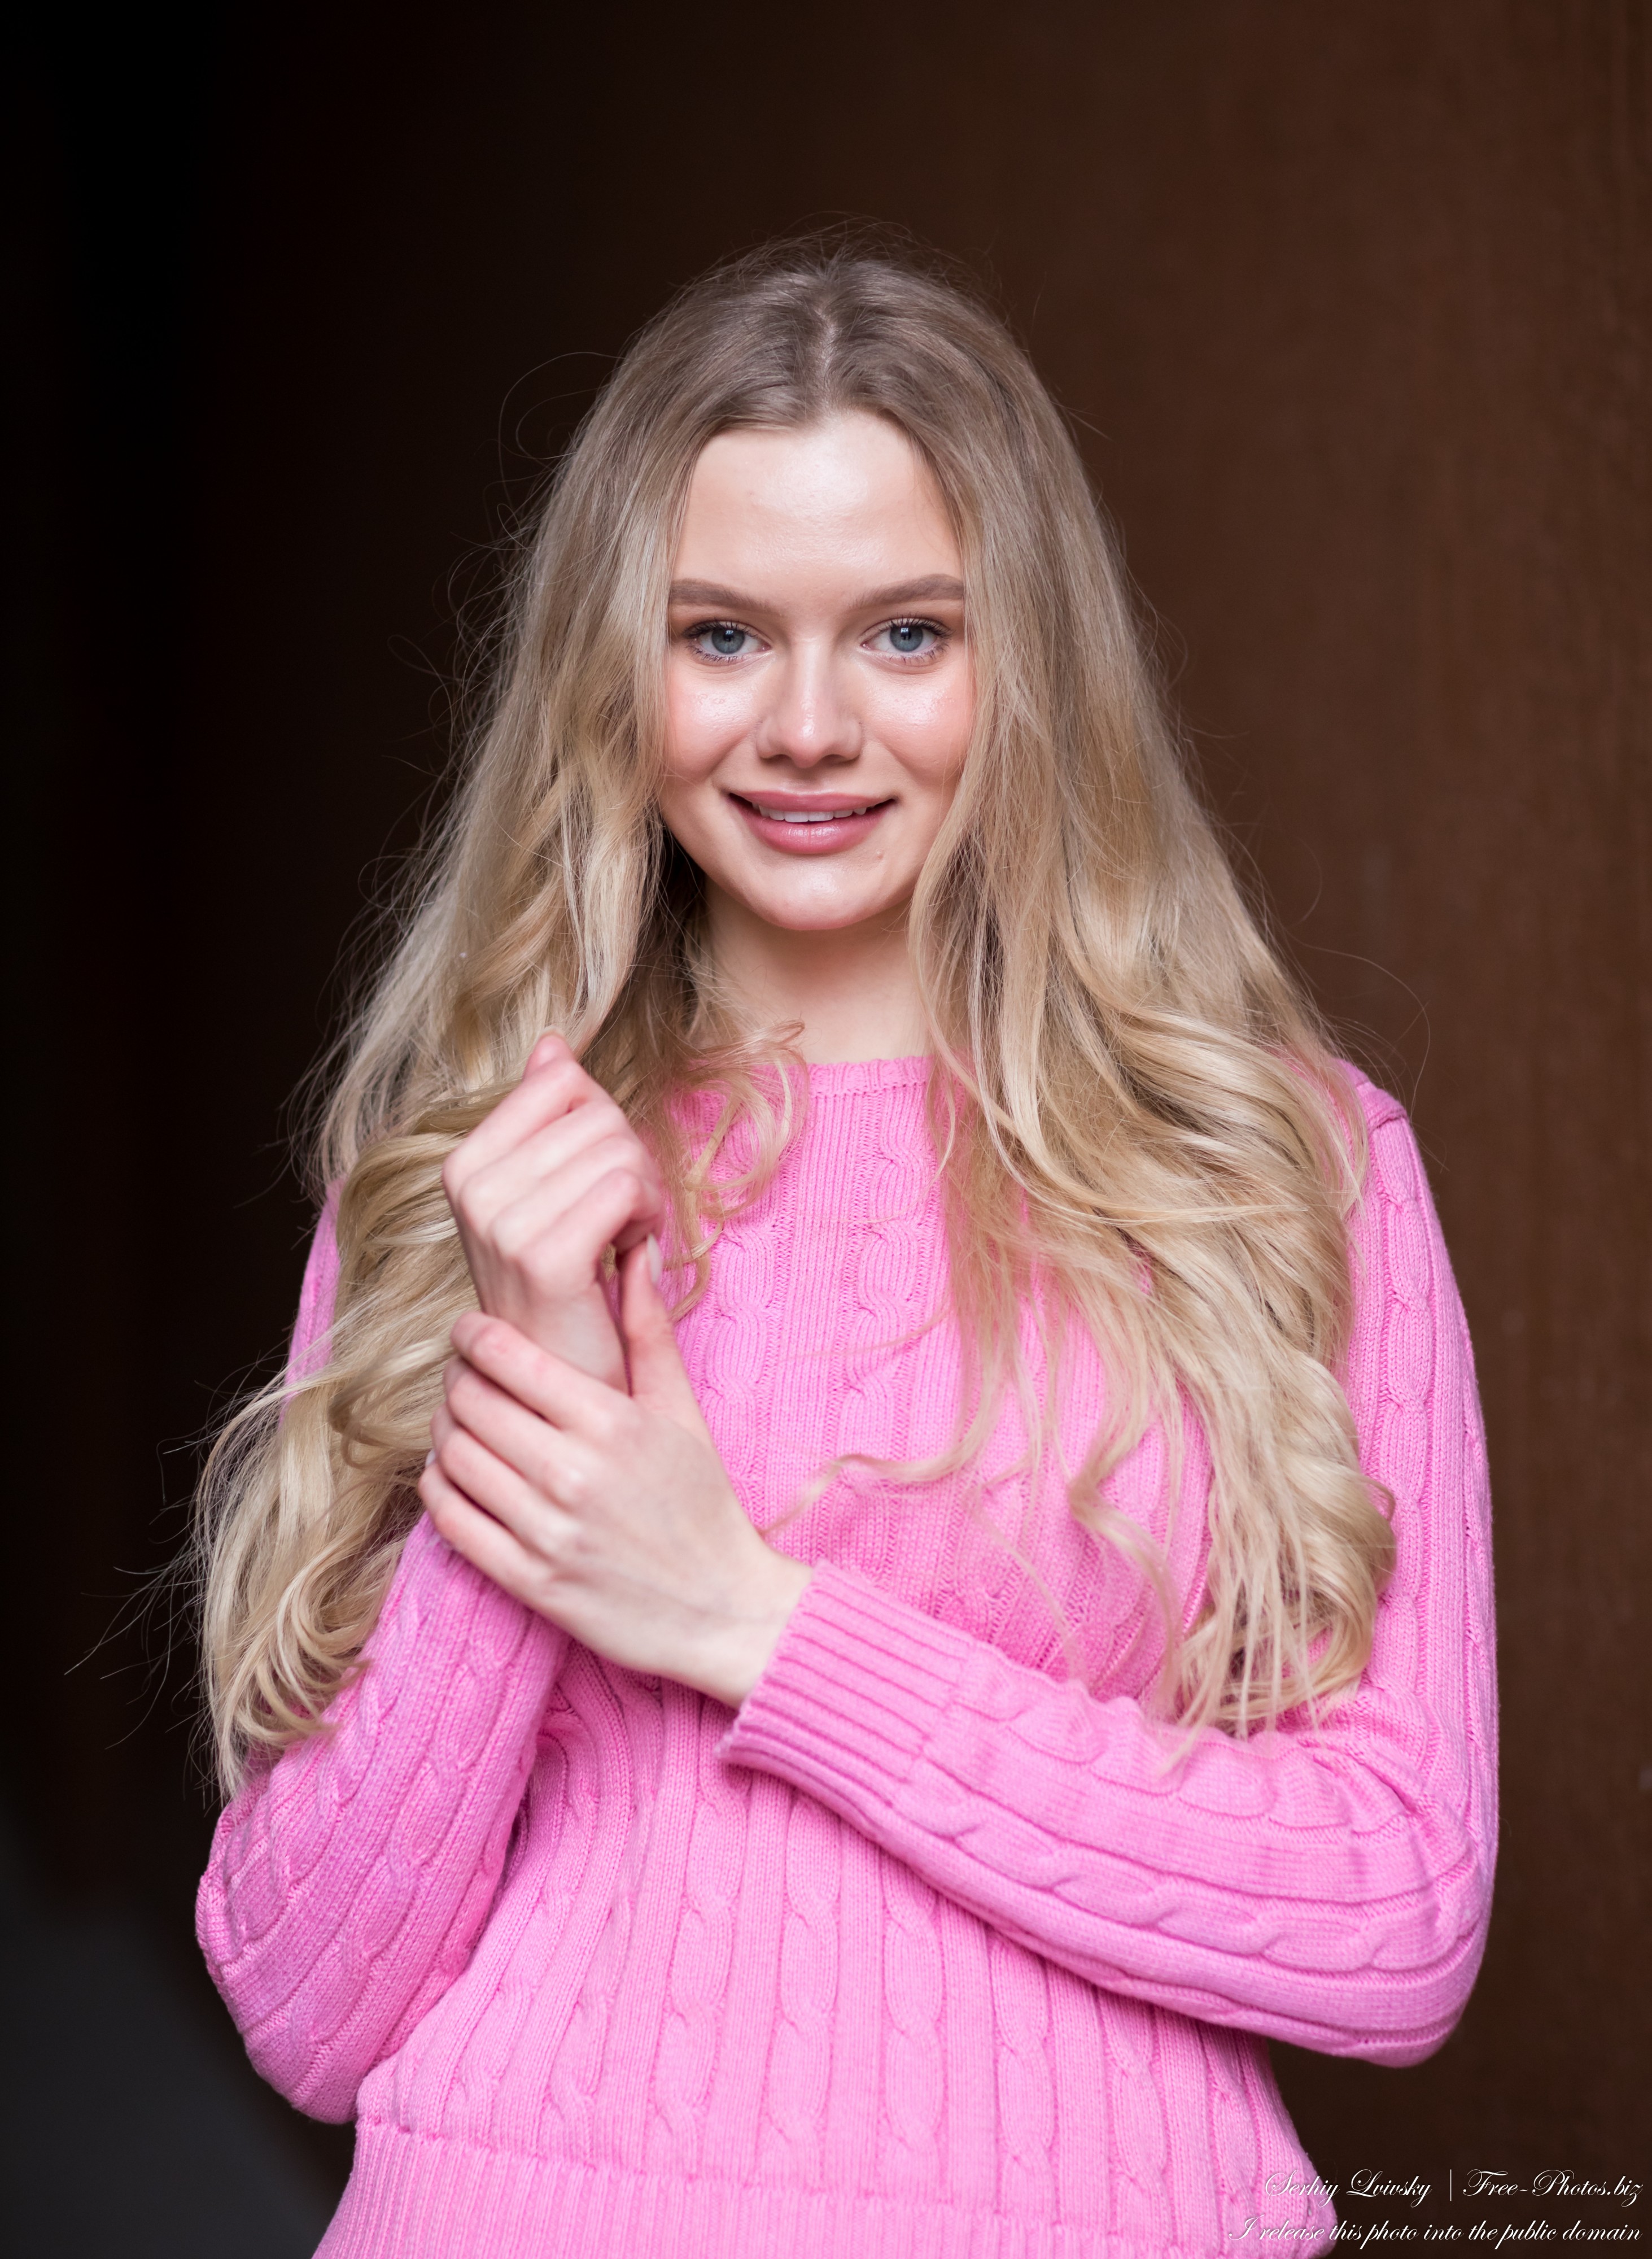 Oksana - a 19-year-old natural blonde girl photographed by Serhiy Lvivsky in March 2021, picture 15